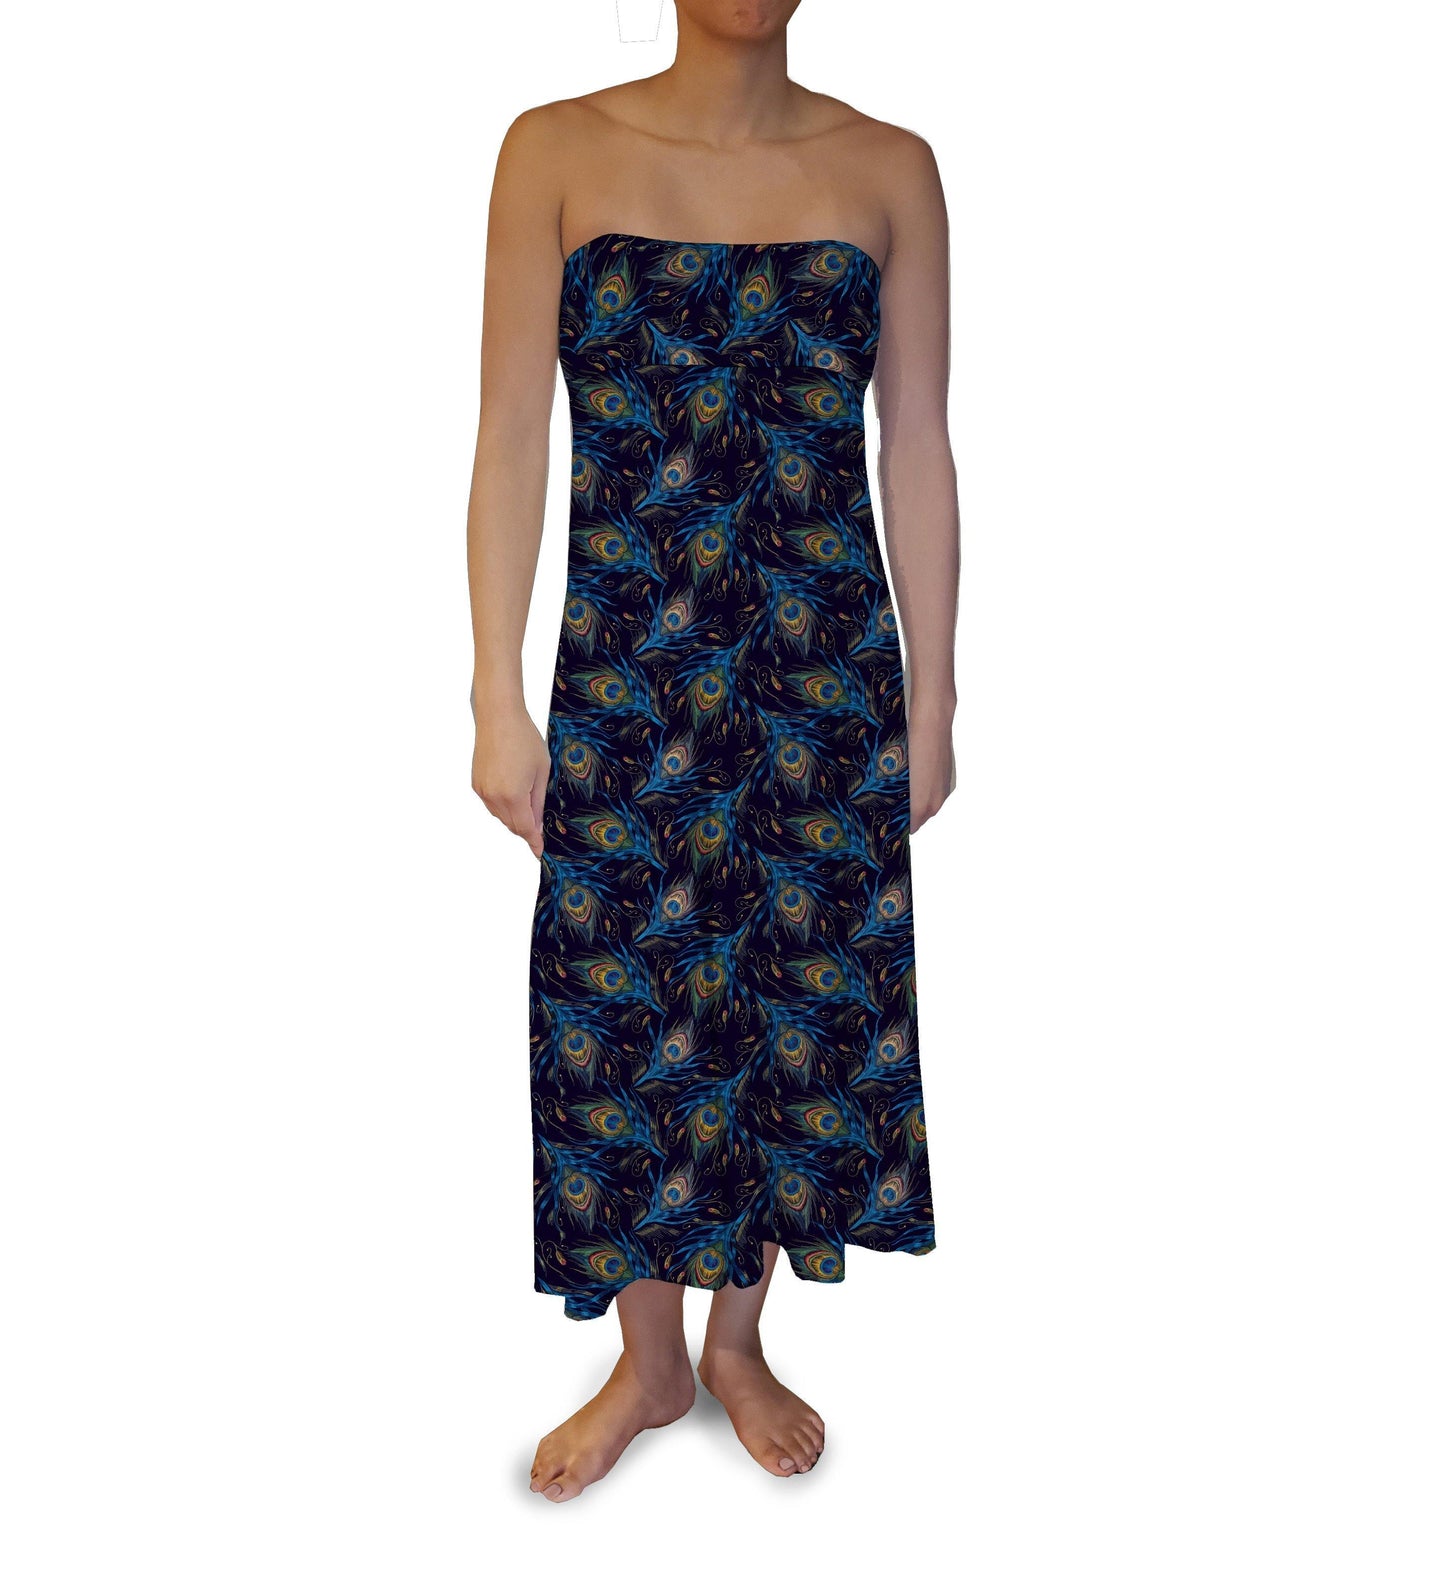 Peacock Feathers Maxi Skirt